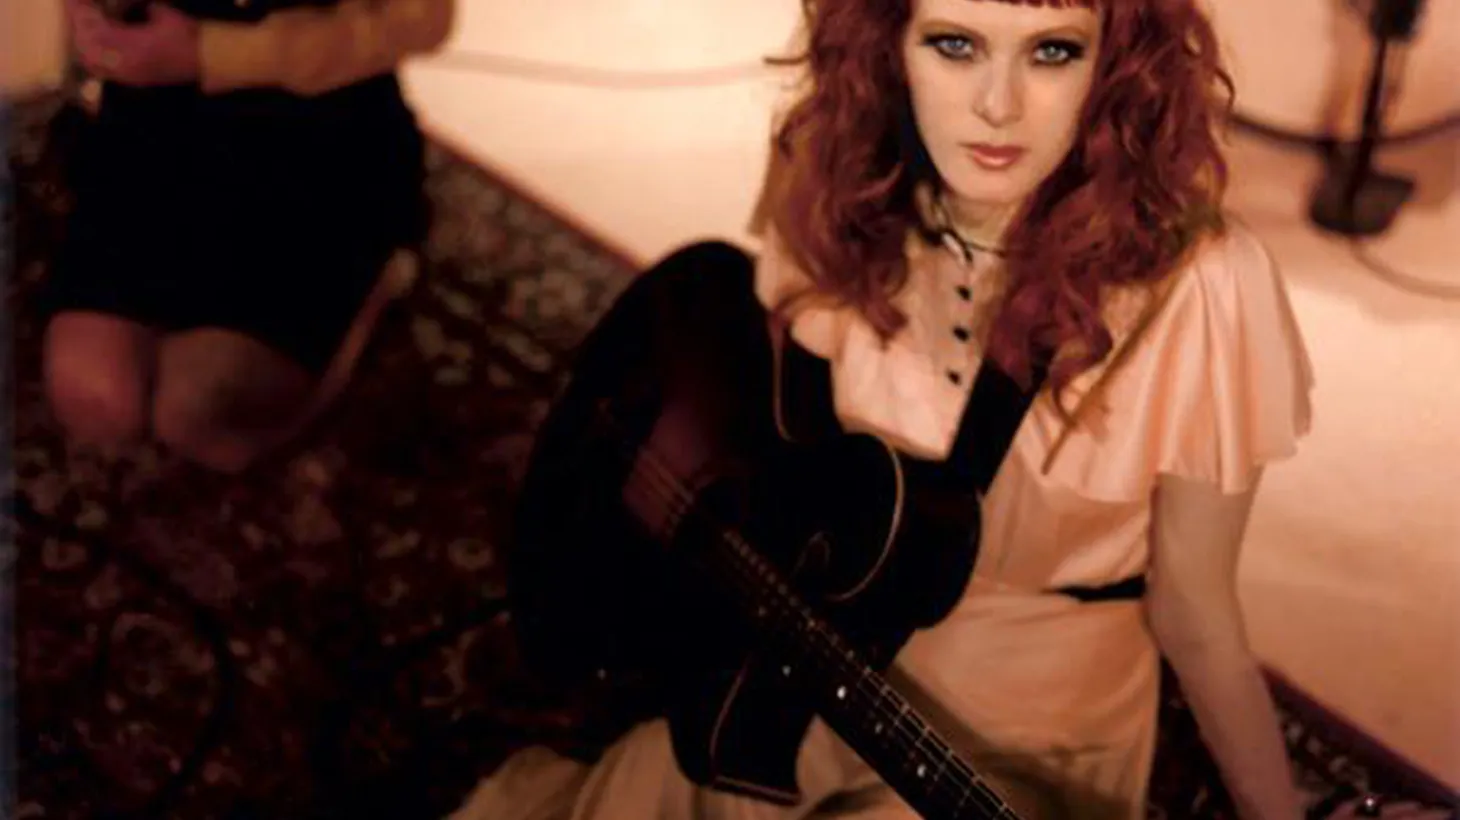 Karen Elson has it all-- she's a model, mother, wife of Jack White, and a talented singer in her own right. Her songs are elegantly crafted and her voice is hauntingly beautiful. We’re thrilled to feature a live session with this chanteuse and her stellar band on Morning Becomes Eclectic at 11:15am.